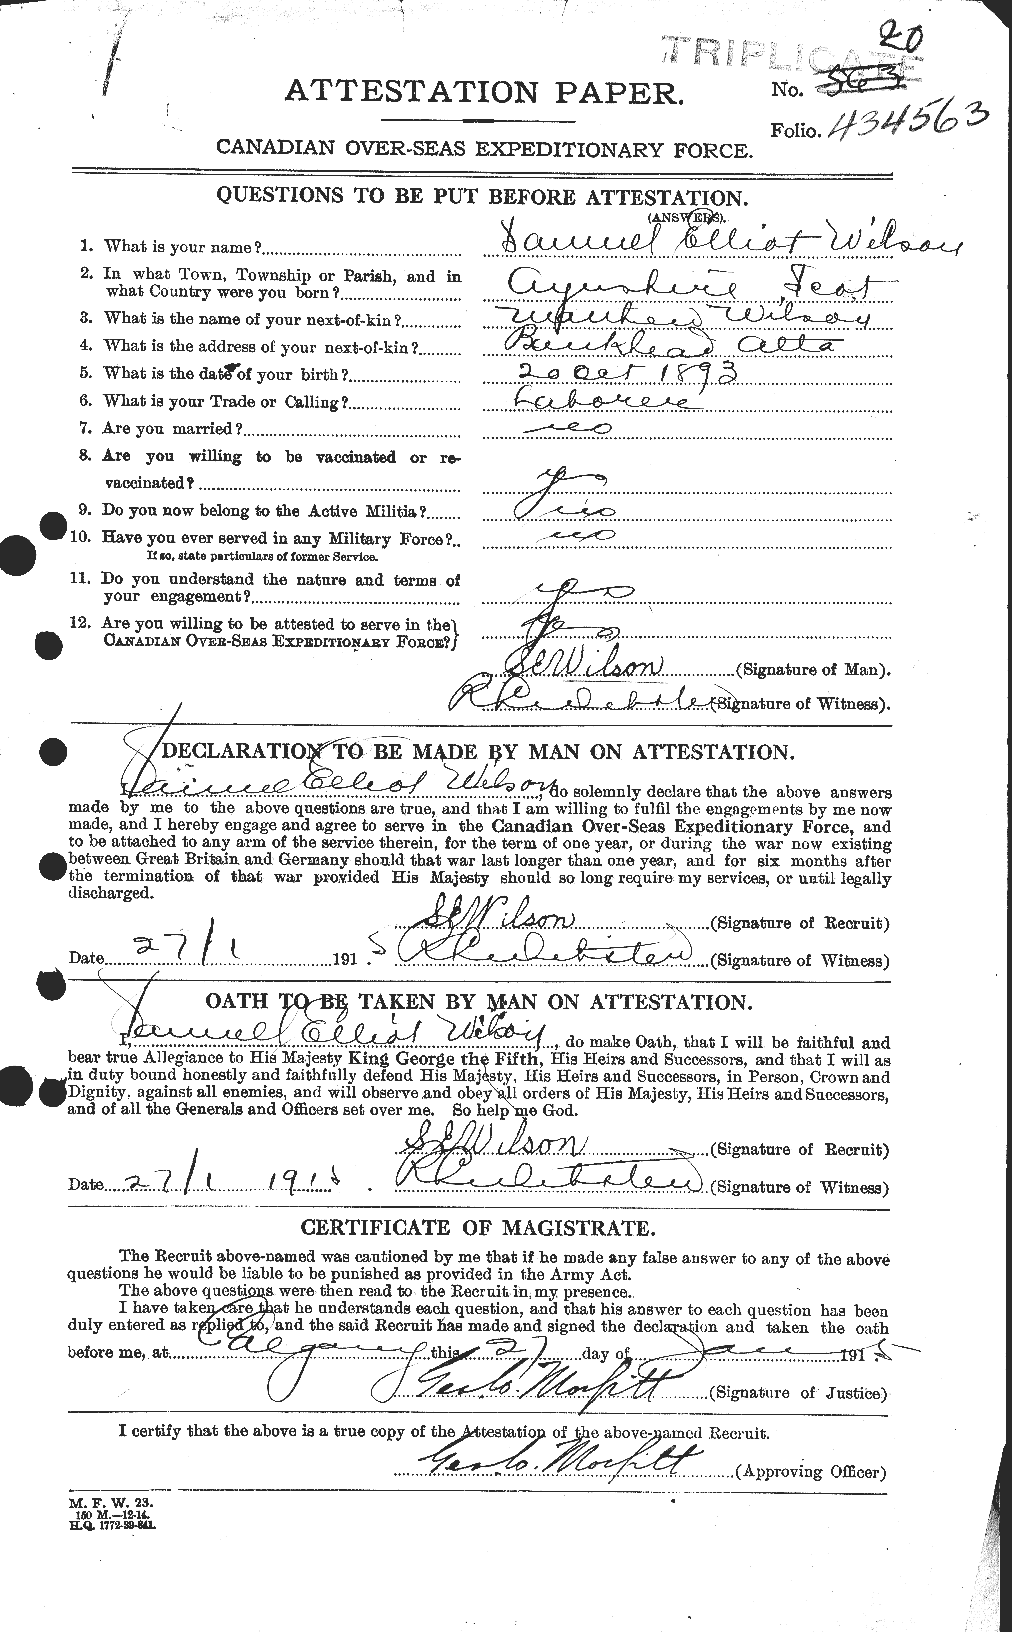 Personnel Records of the First World War - CEF 681113a